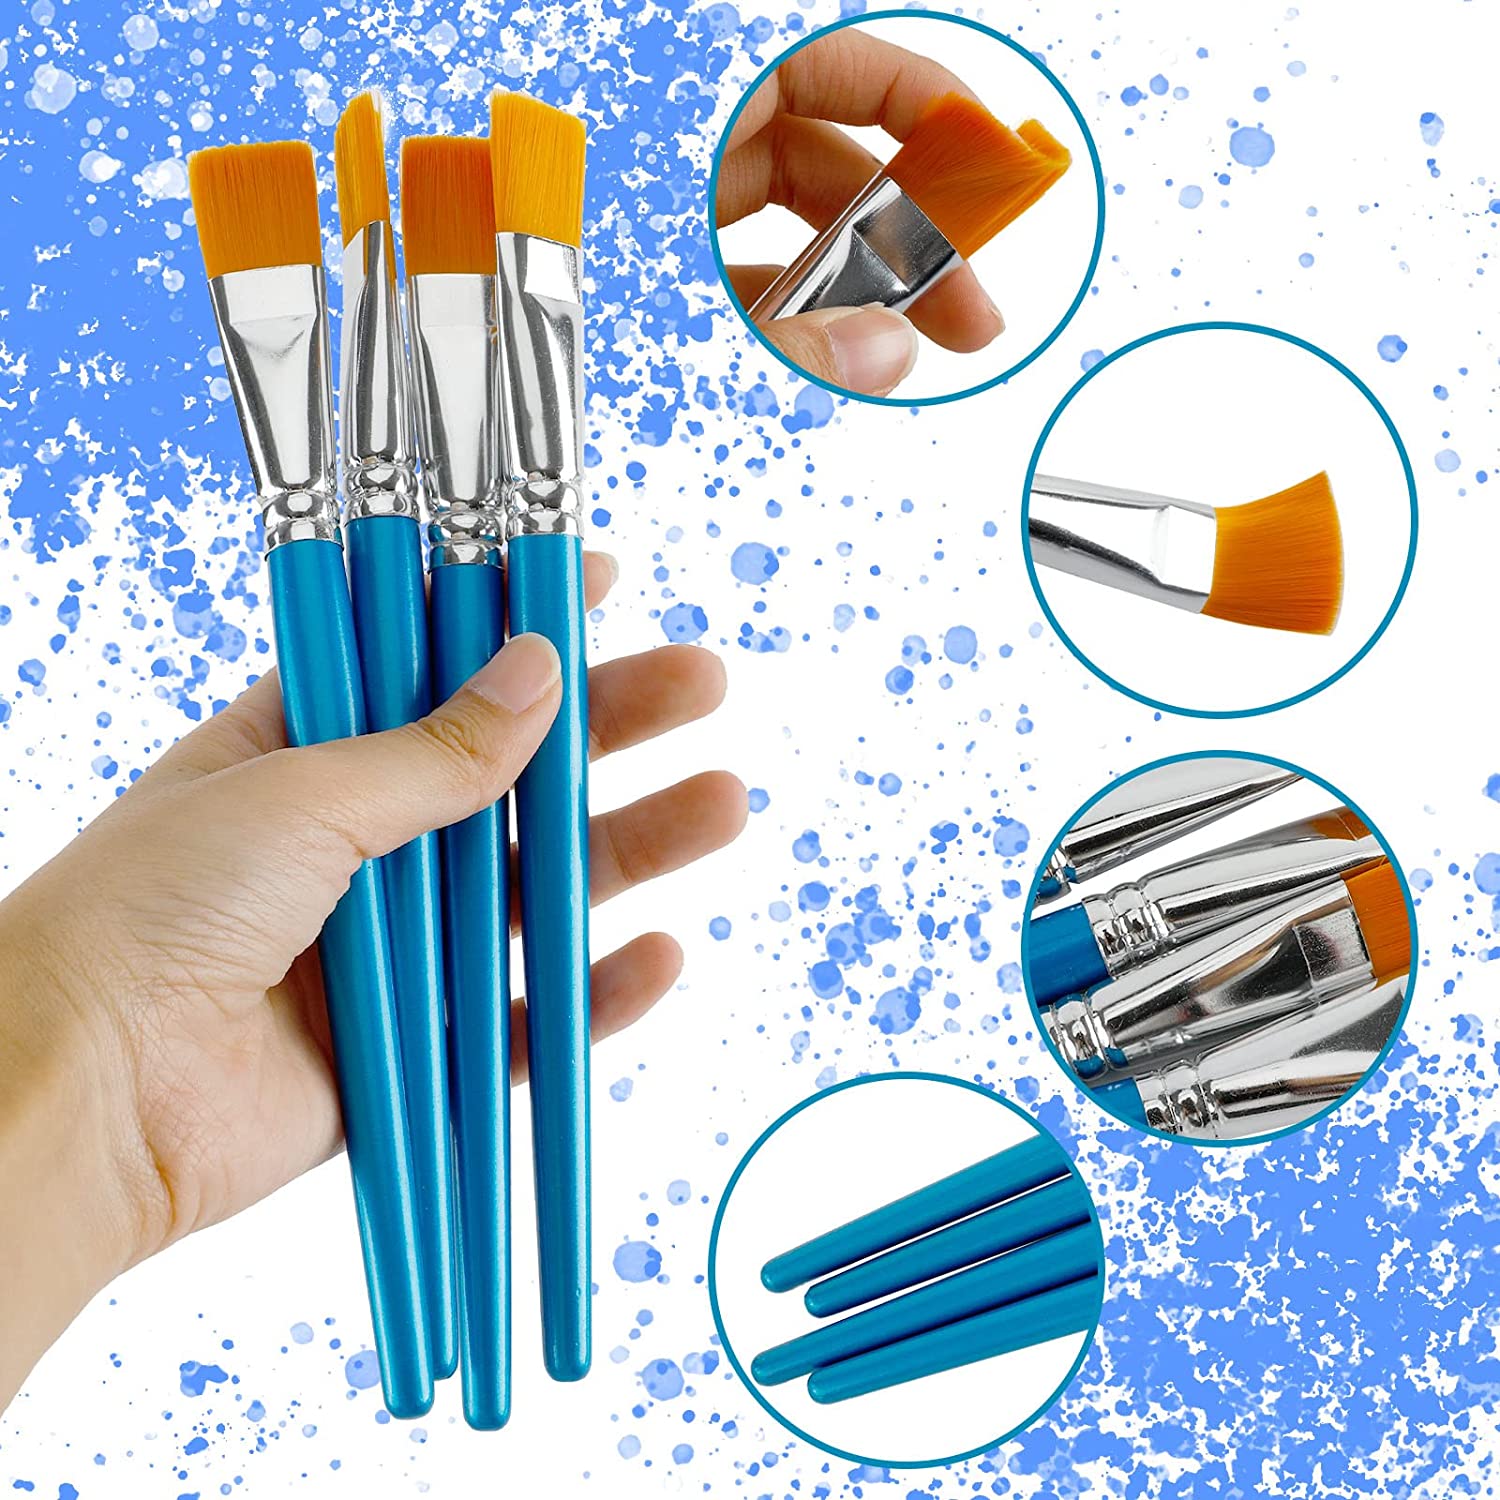 10 Pieces 3/4 inch Flat Paint Brushes, Watercolor Paint Brush for Acrylic Painting, Synthetic Nylon Paint Brushes with Wooden Handle, Artist Craft